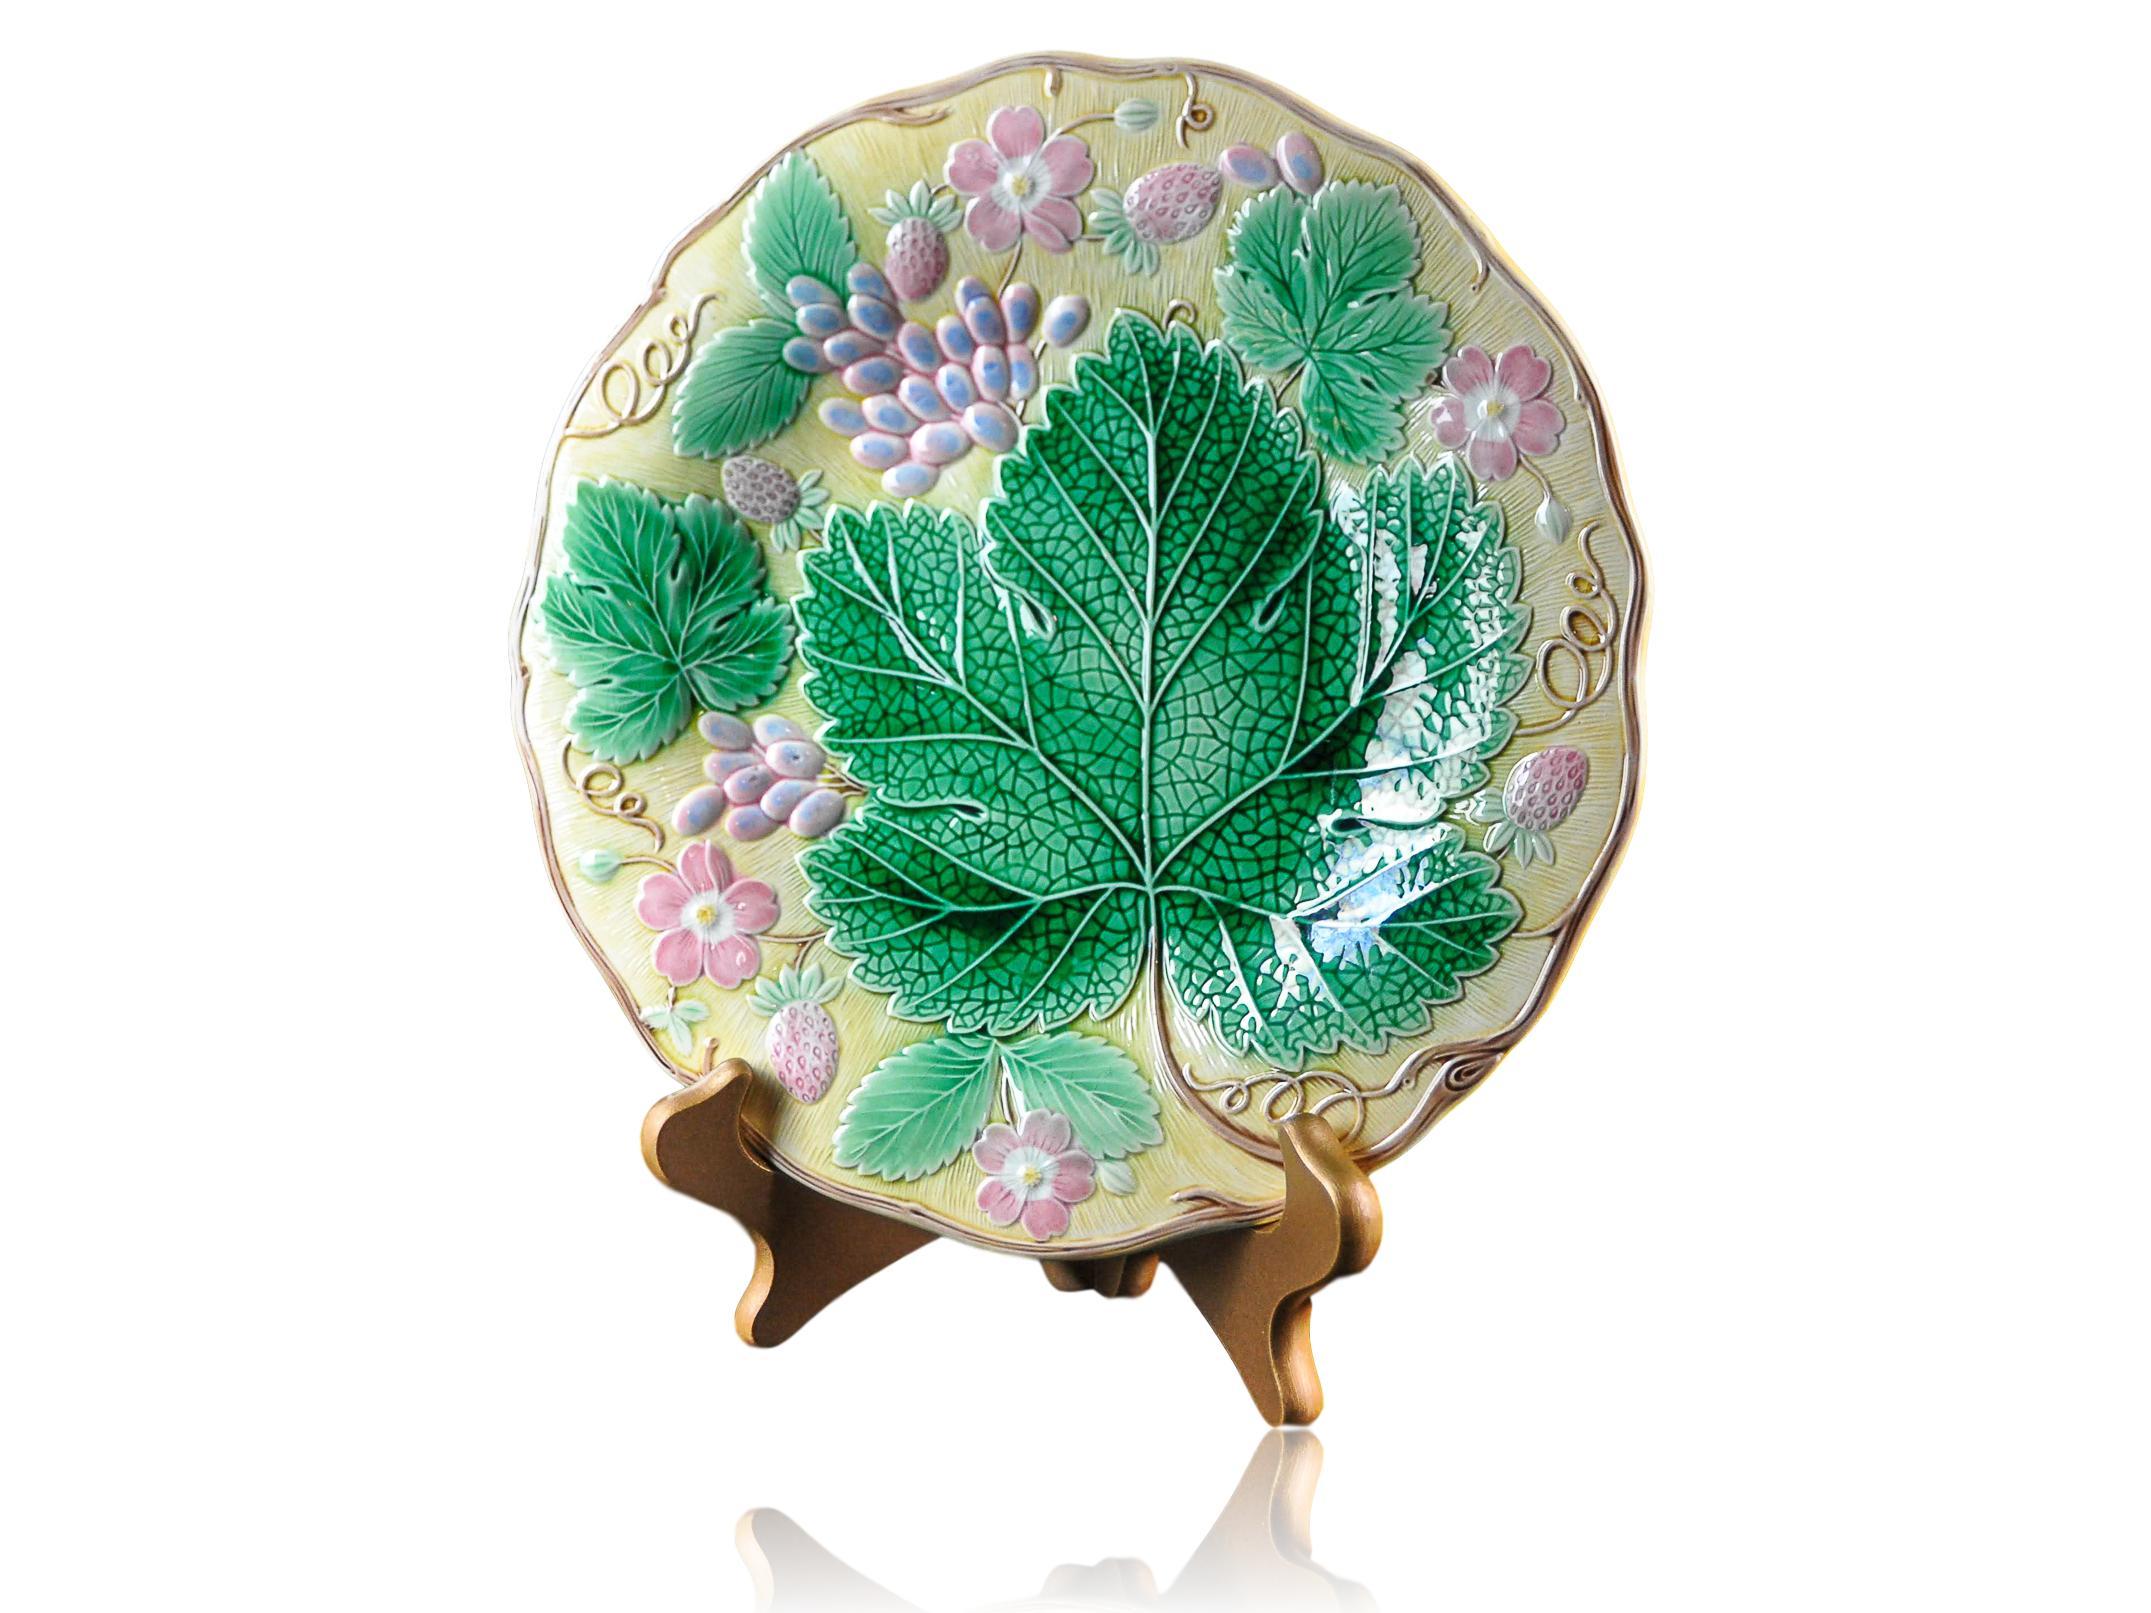 Wedgwood Majolica 'Vine & Strawberry' plate, English, dated 1929, 9-in diameter, with a large central green grape leaf, purple grapes, reddish pink strawberries and blossoms on a yellow ground. Impressed marks to reverse: 'Wedgwood' 'MADE IN